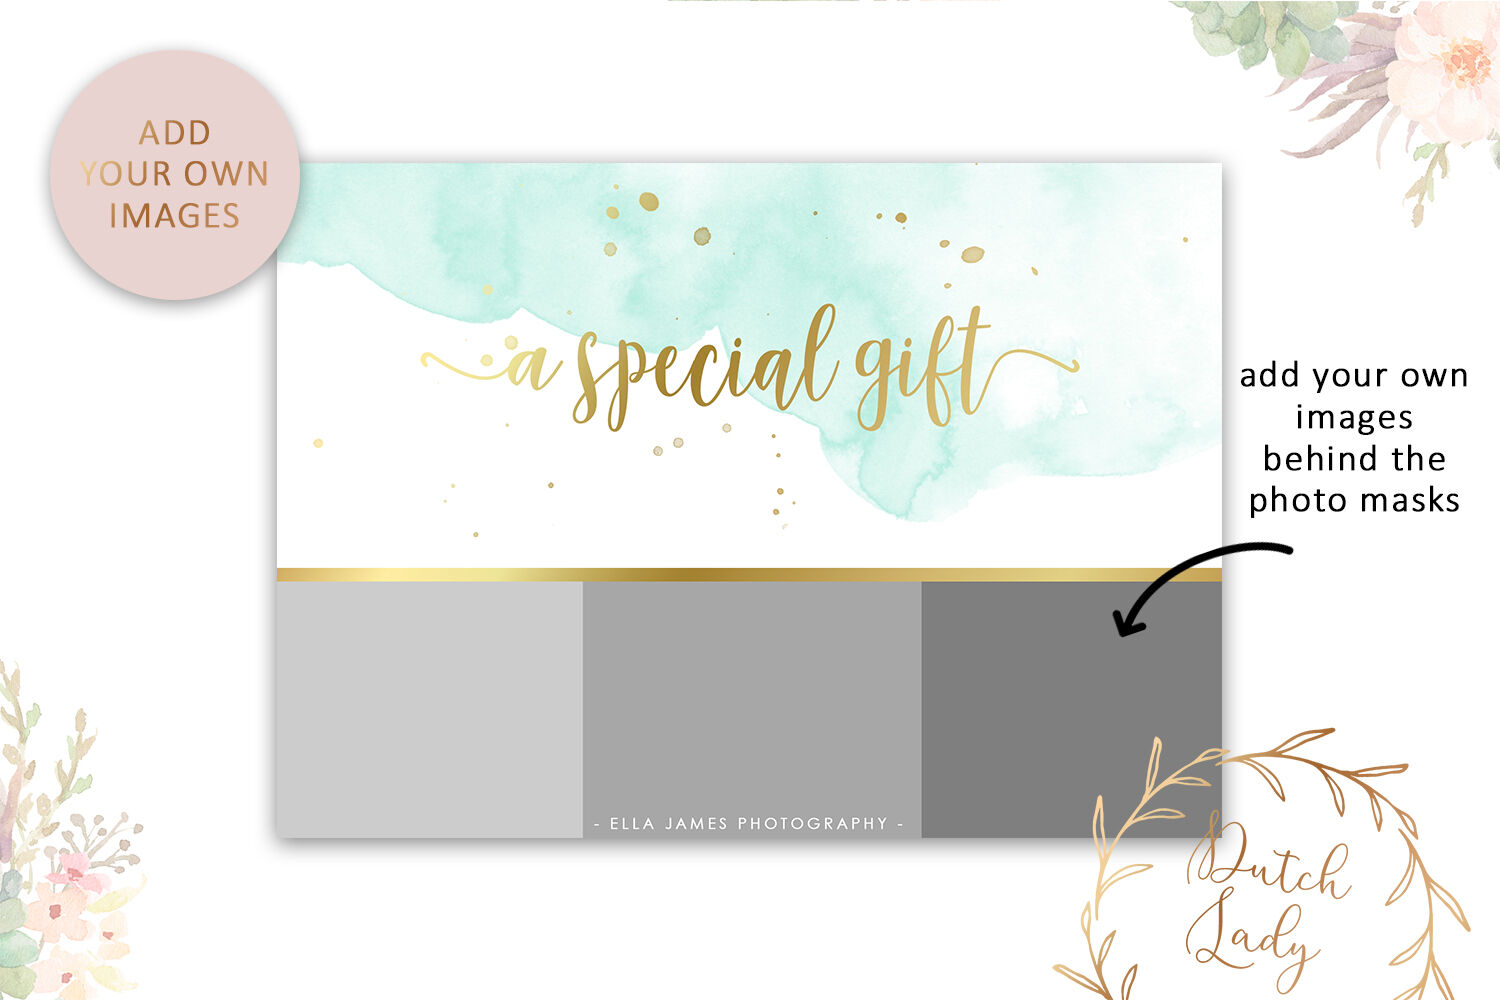 PSD Photo Gift Card Template #4 By The Dutch Lady Designs